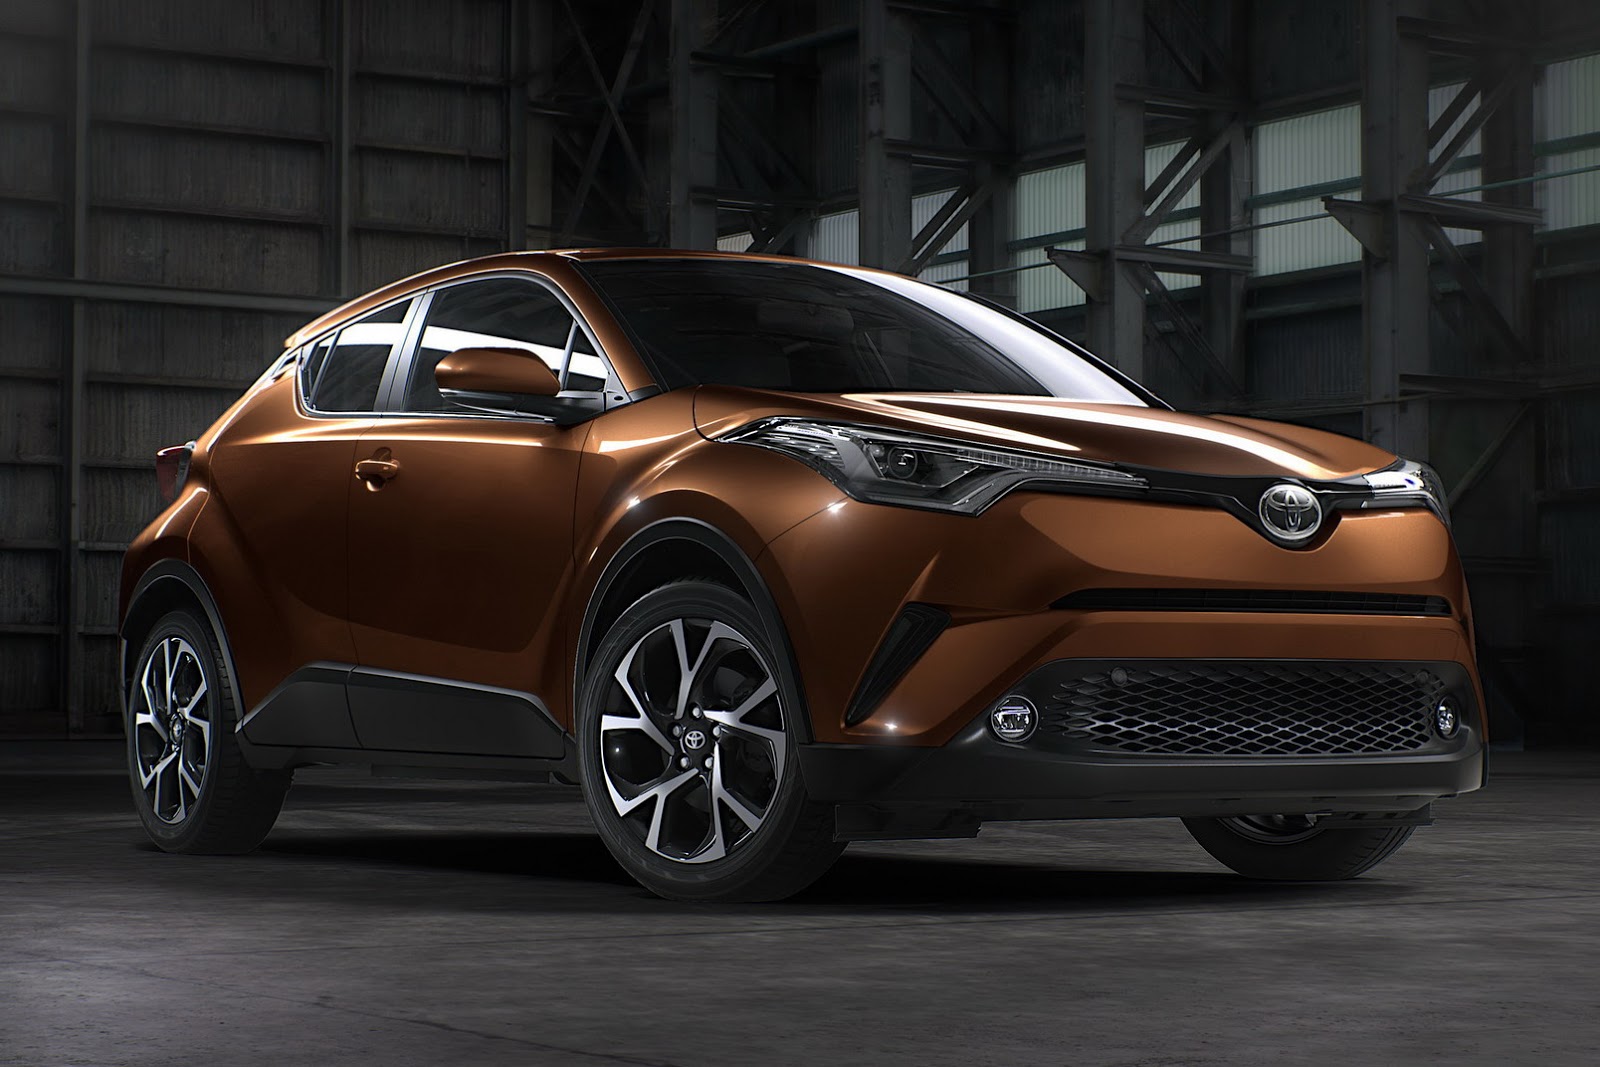 Check Out The 2017 Toyota C-HR Small Crossover In Fancier Colors